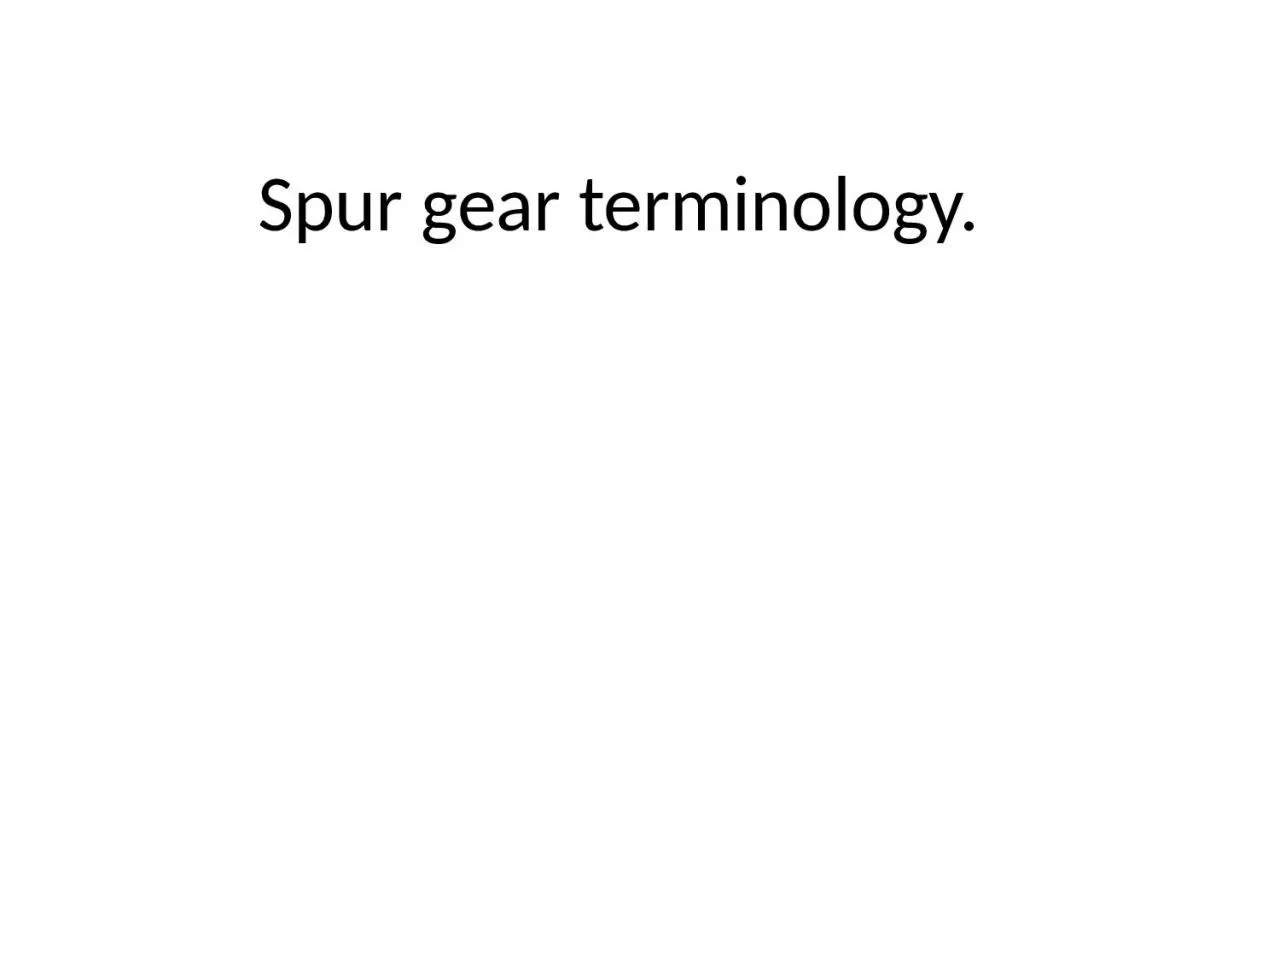 Spur gear terminology. Terminology of gear tooth